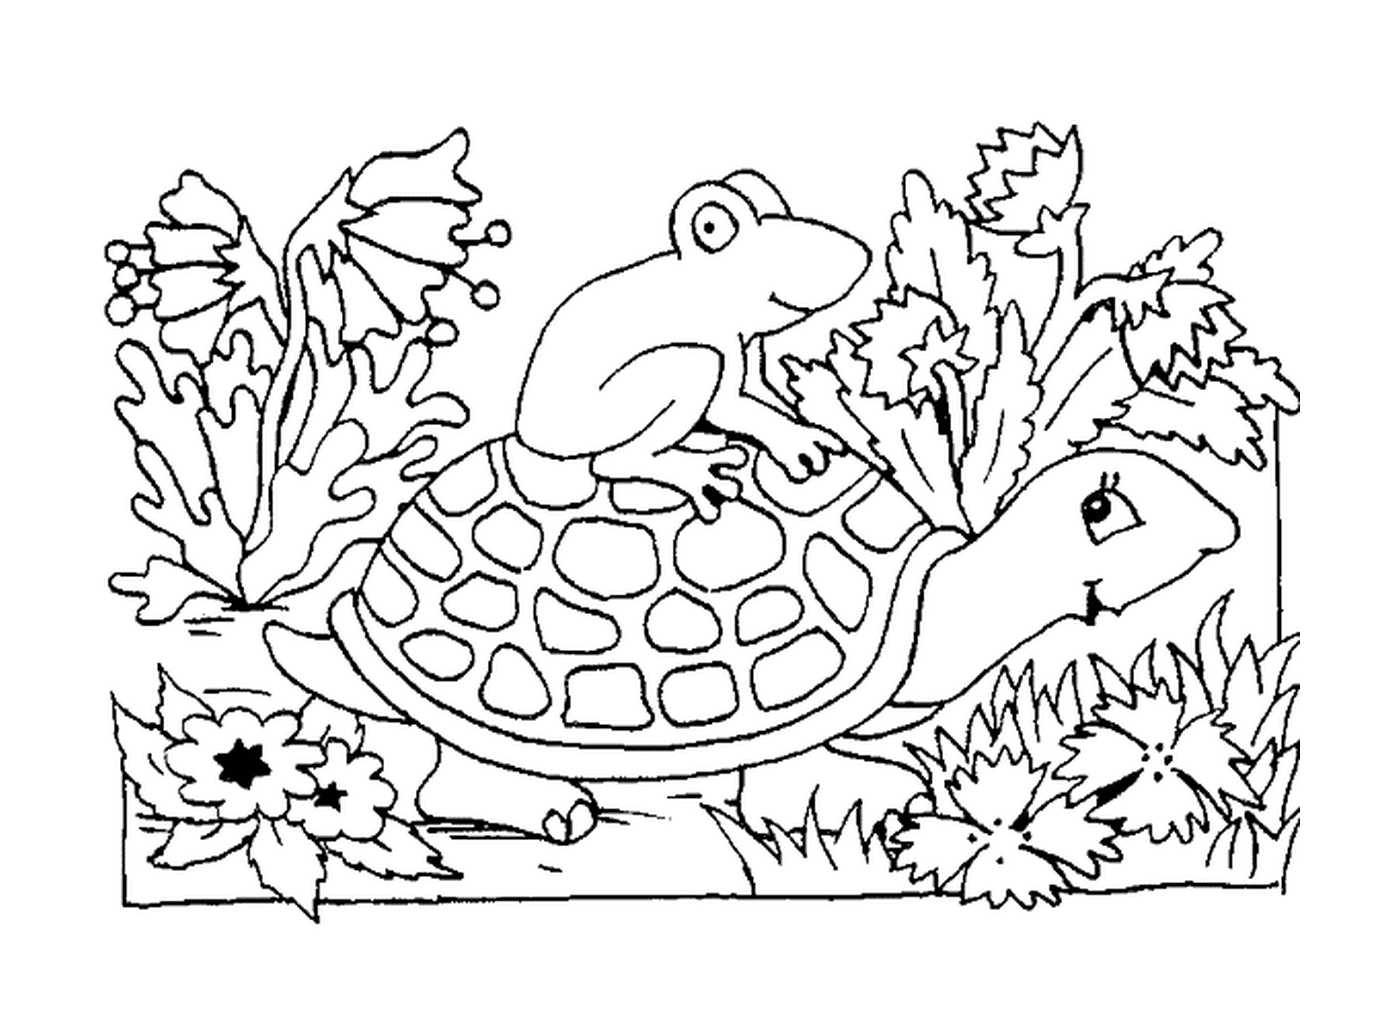  Frog on the shell of the turtle 